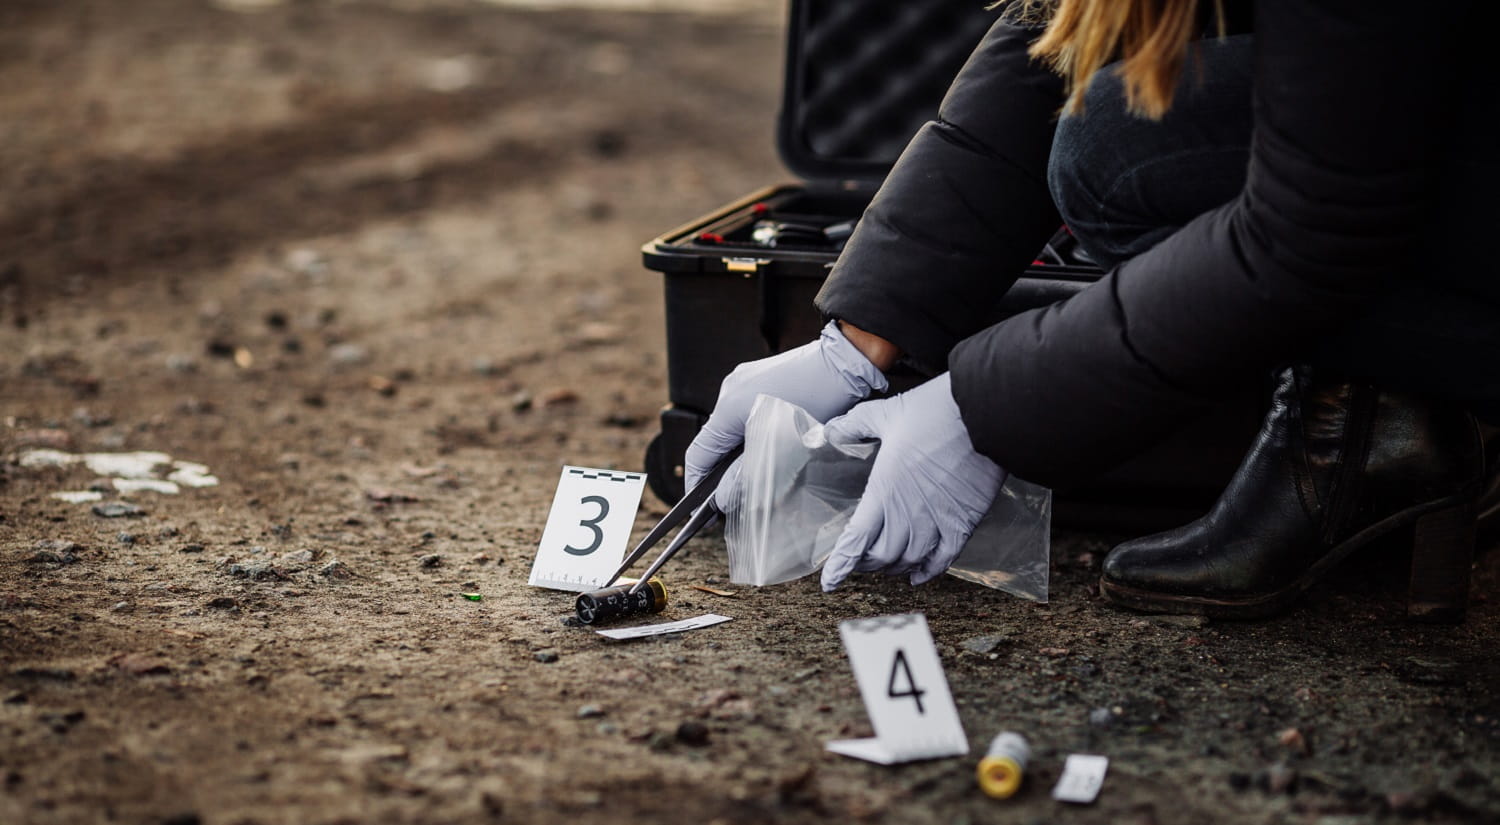 A woman collecting evidence from a crime scene